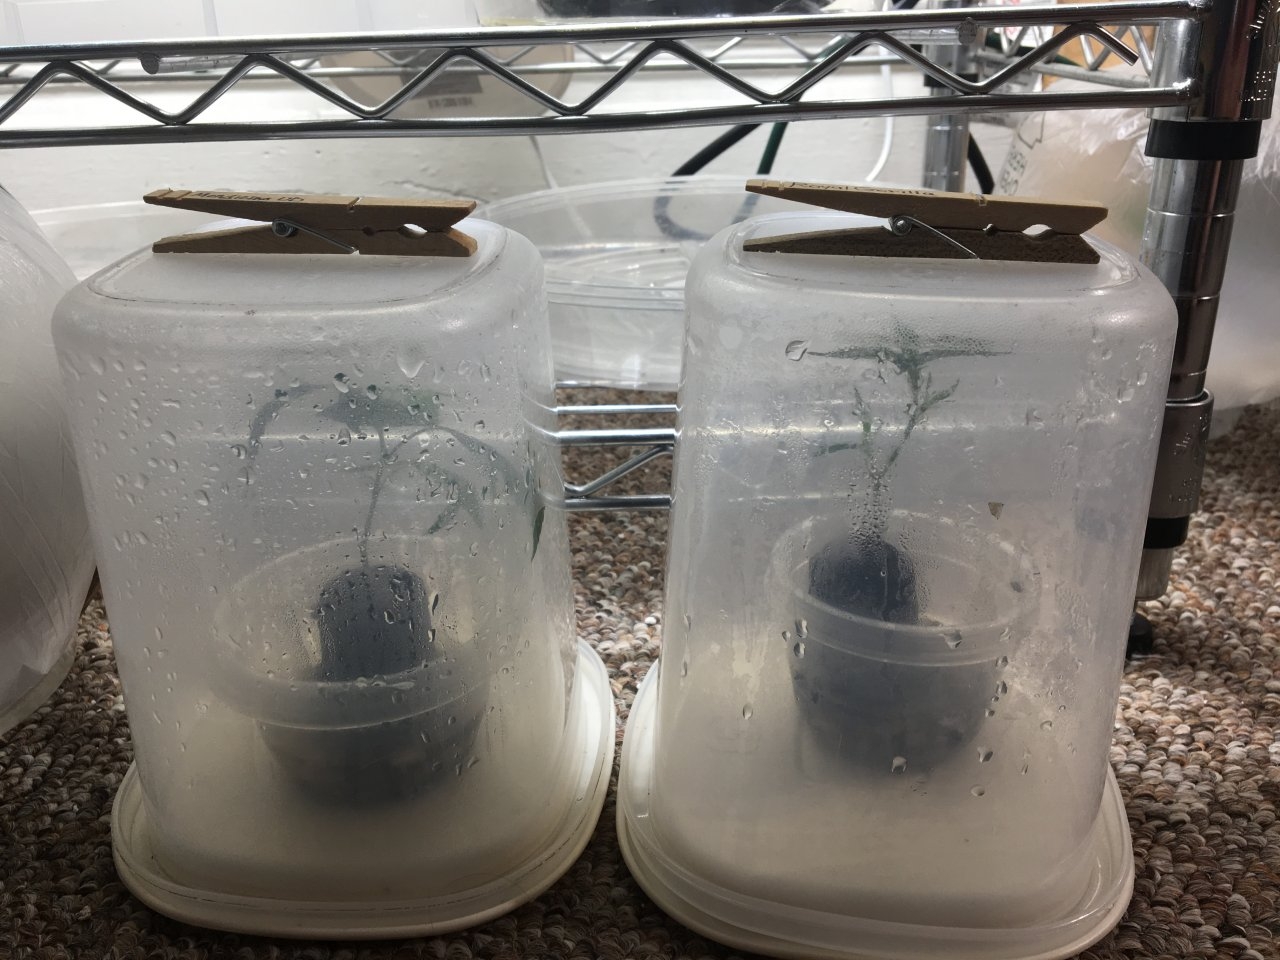 Containers for clones